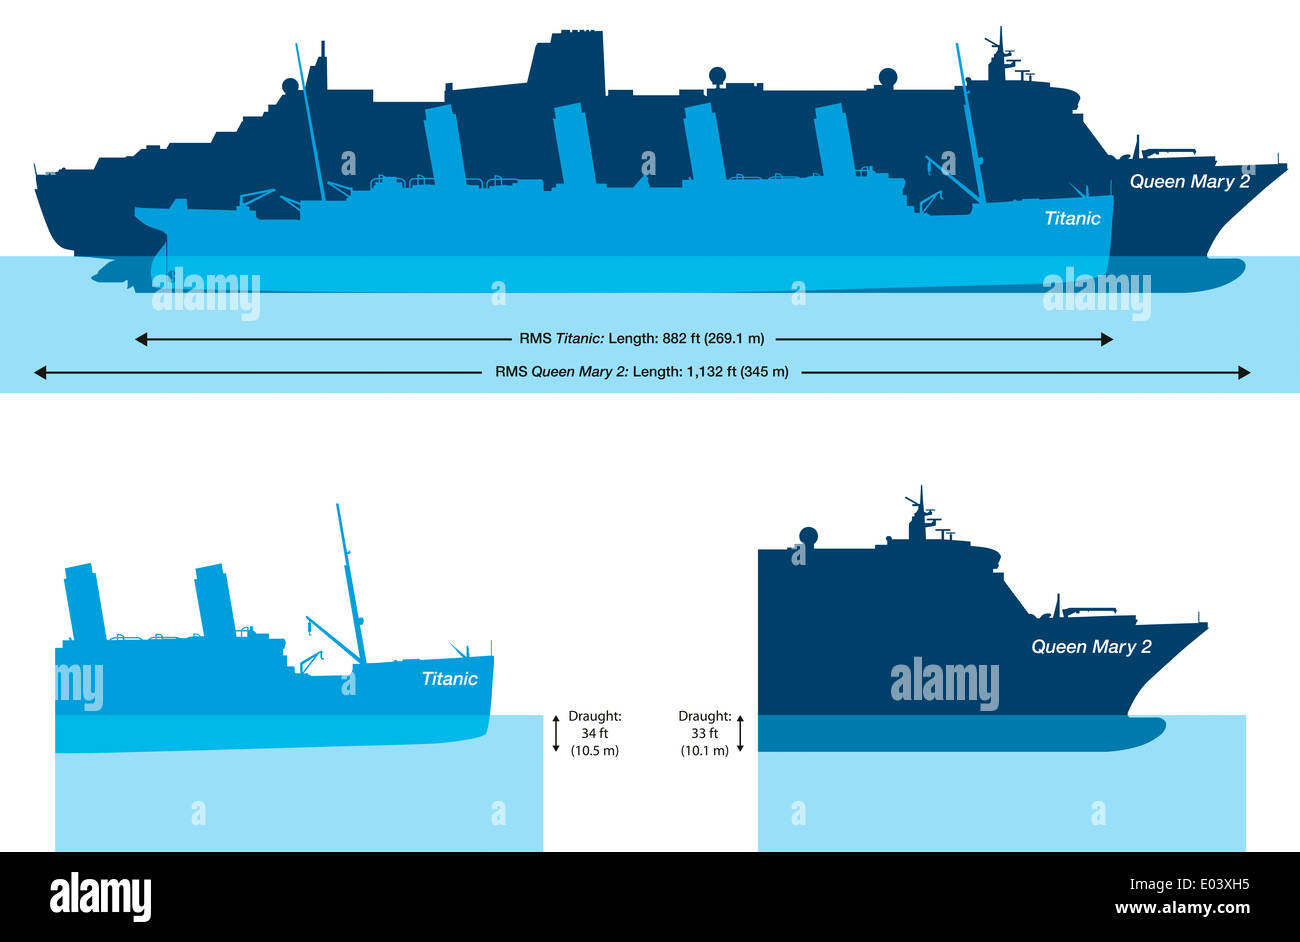 Titanic And Queen Mary 2 - Size comparison and water depth at the Titanic and Queen Mary 2 - largest atlantic liner in the world Stock Photo